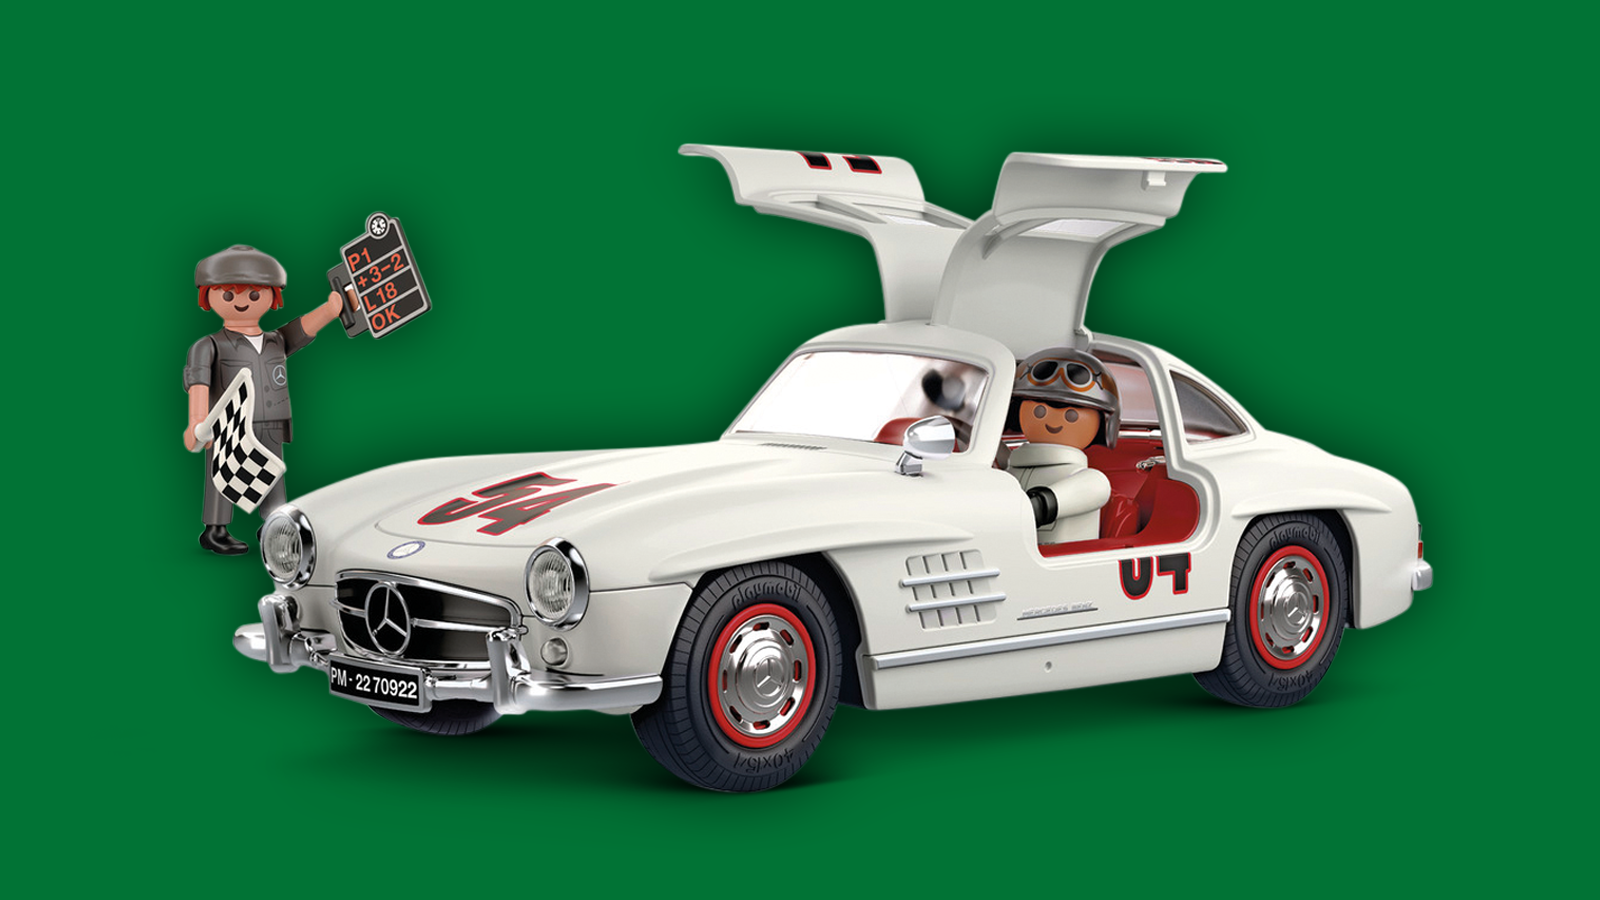 73 ideas for classic car Christmas gifts